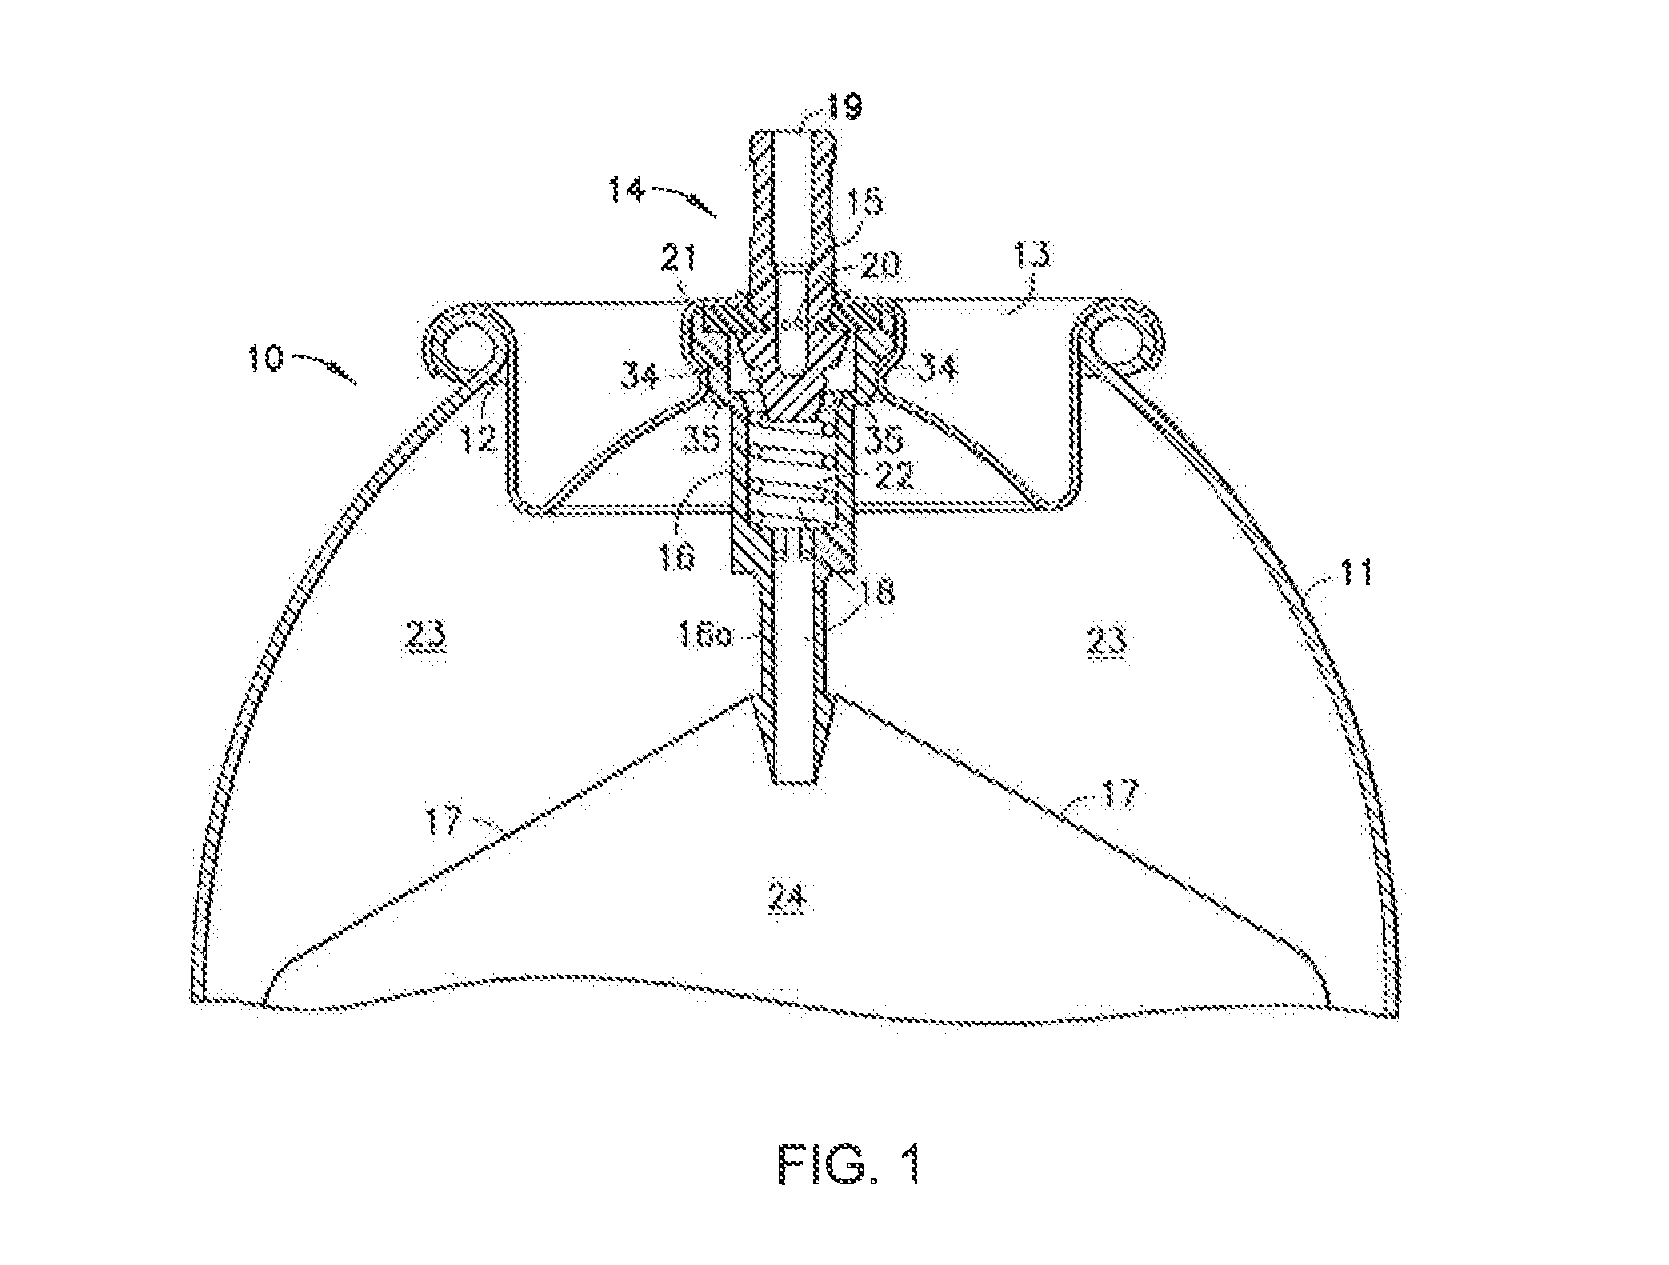 Device and composition for spraying dry pet food with an oil, composition containing omega 3 compounds of salmon oil in a spray for pets based on bag on valve technology